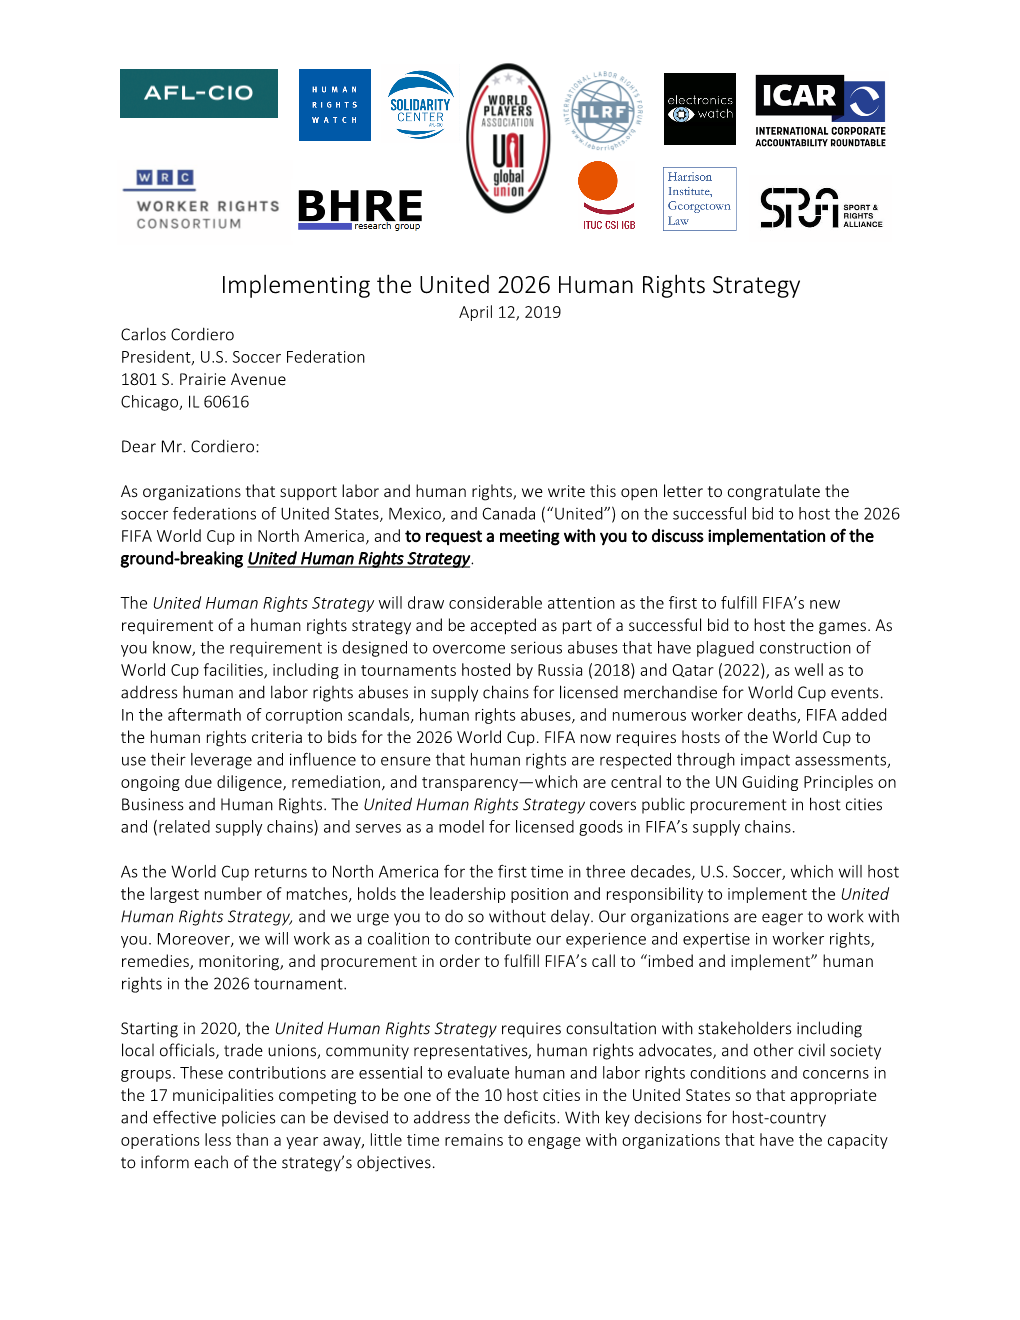 United 2026 Labor Stakeholders Letter to US Soccer April 12